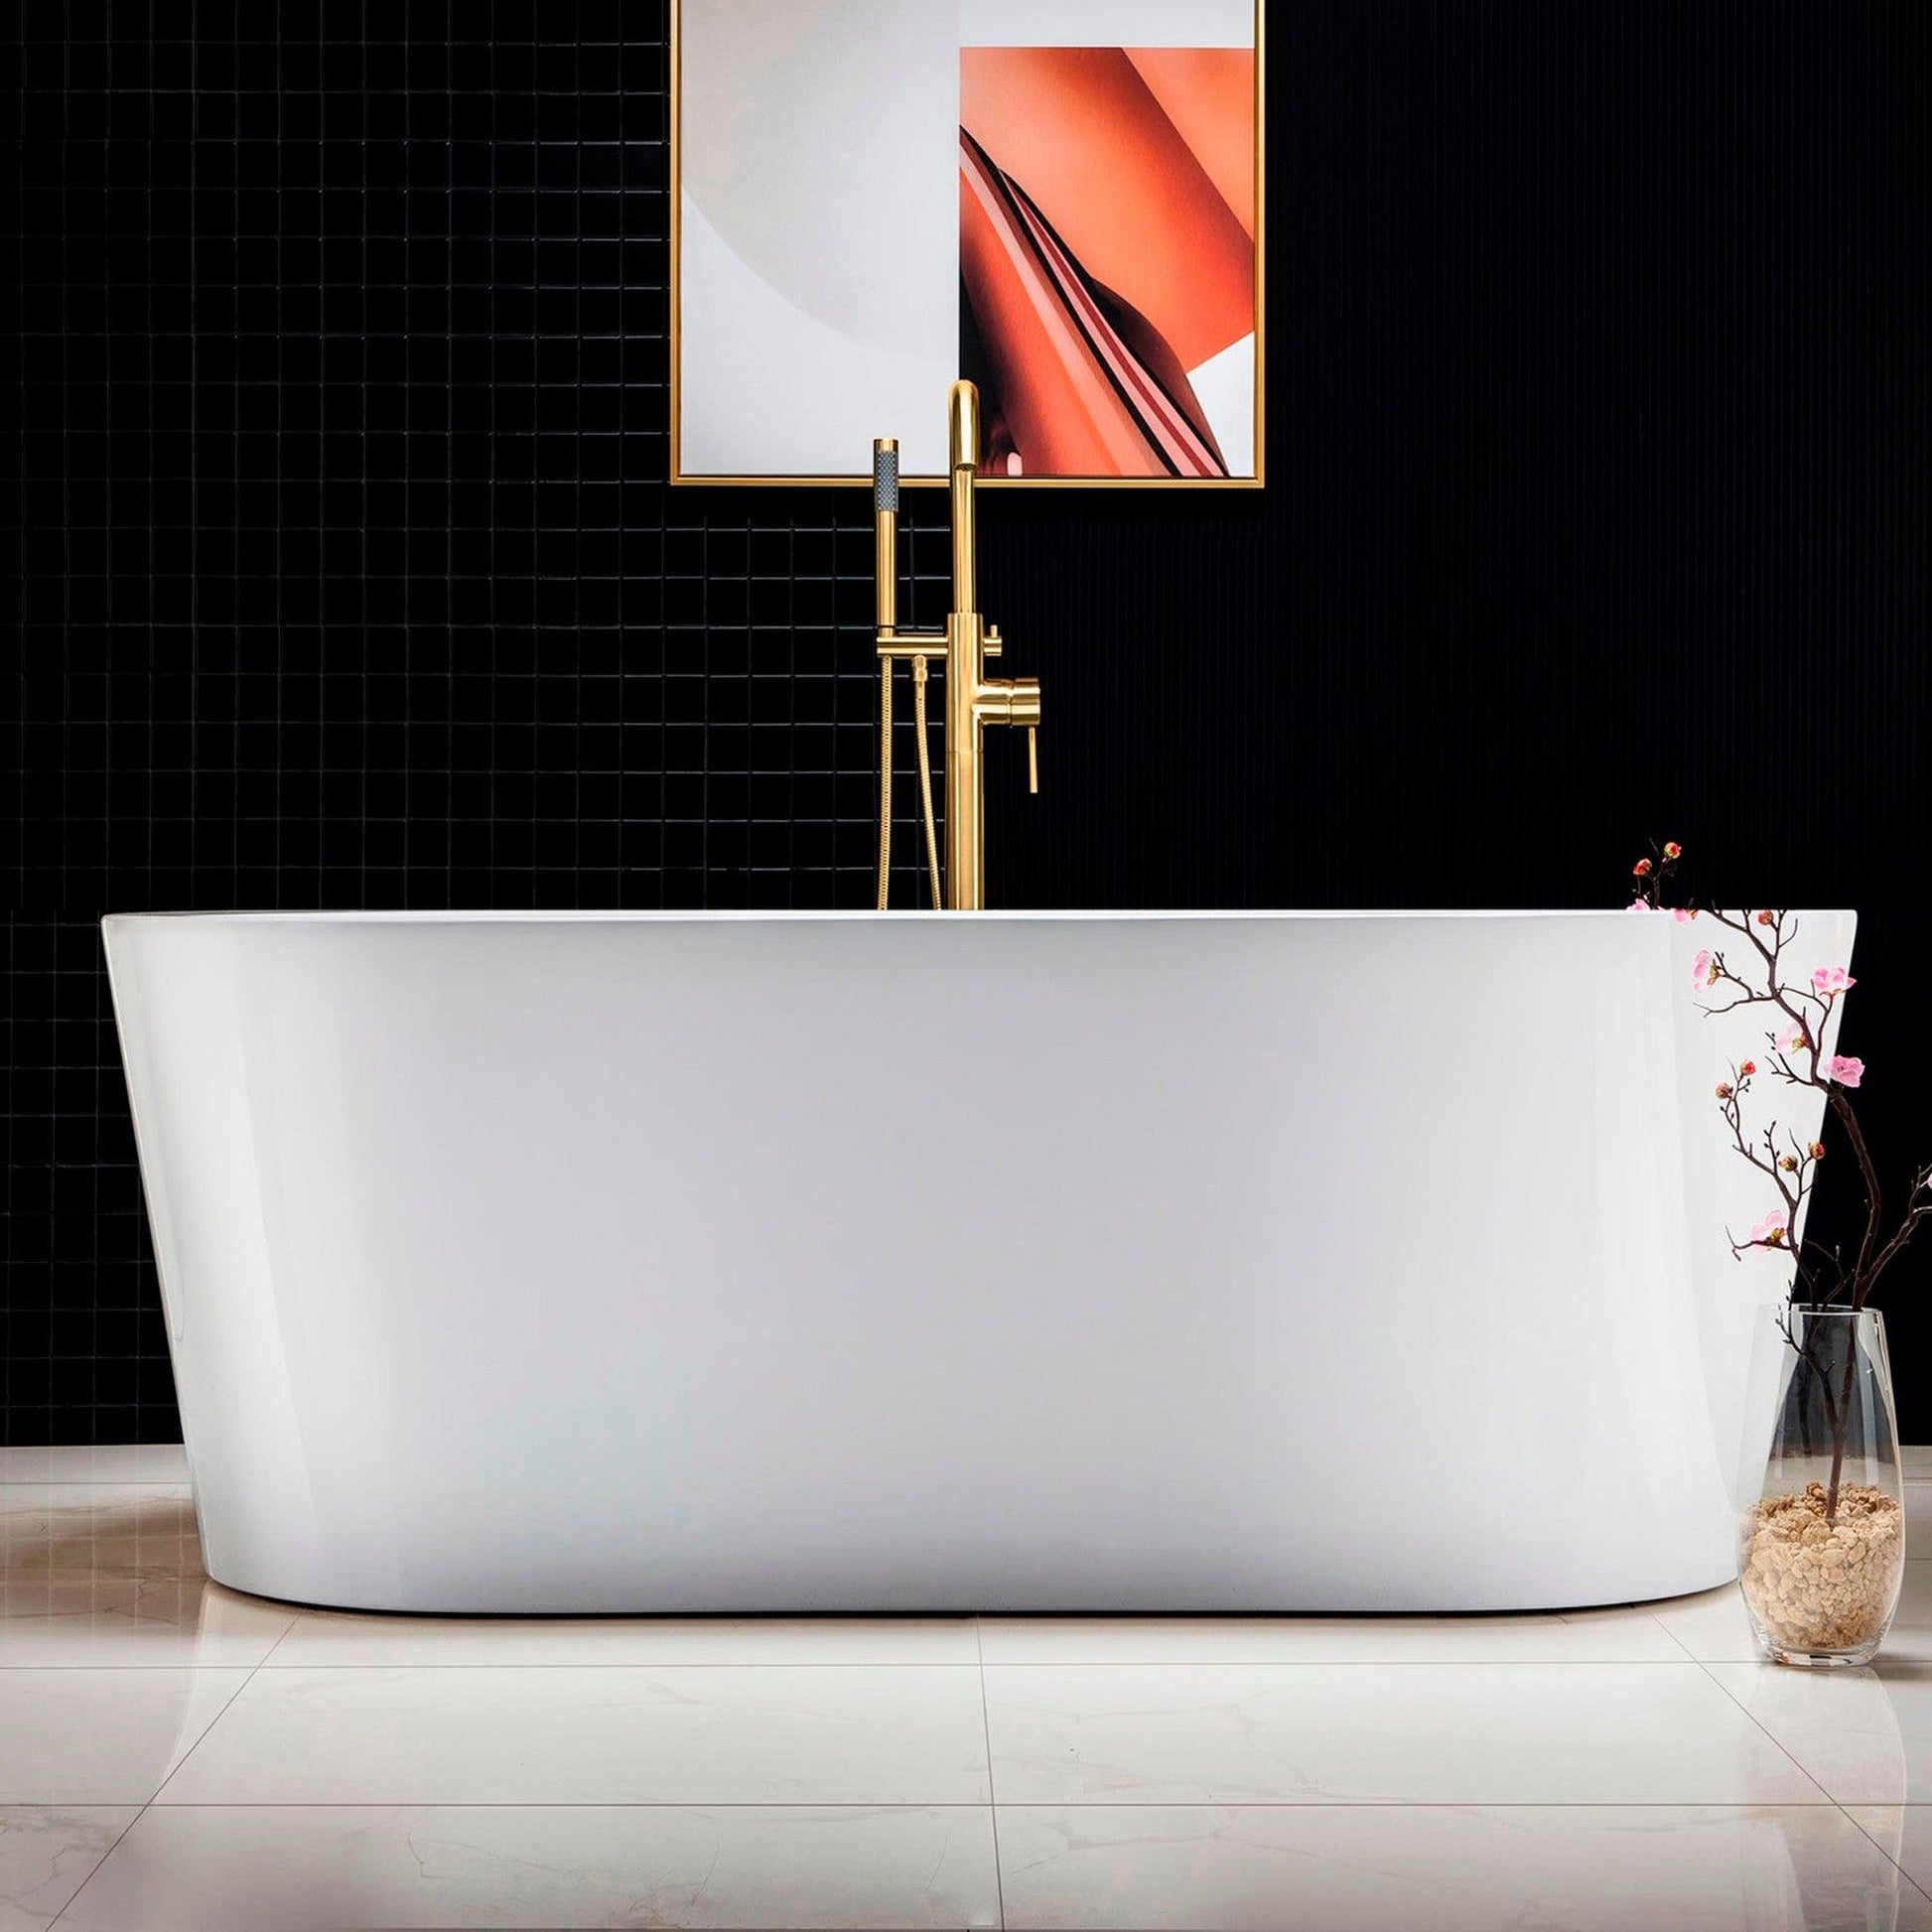 WoodBridge B0012 59" White Acrylic Freestanding Soaking Bathtub With Brushed Gold Drain, Overflow, F0073BGVT Tub Filler and Caddy Tray